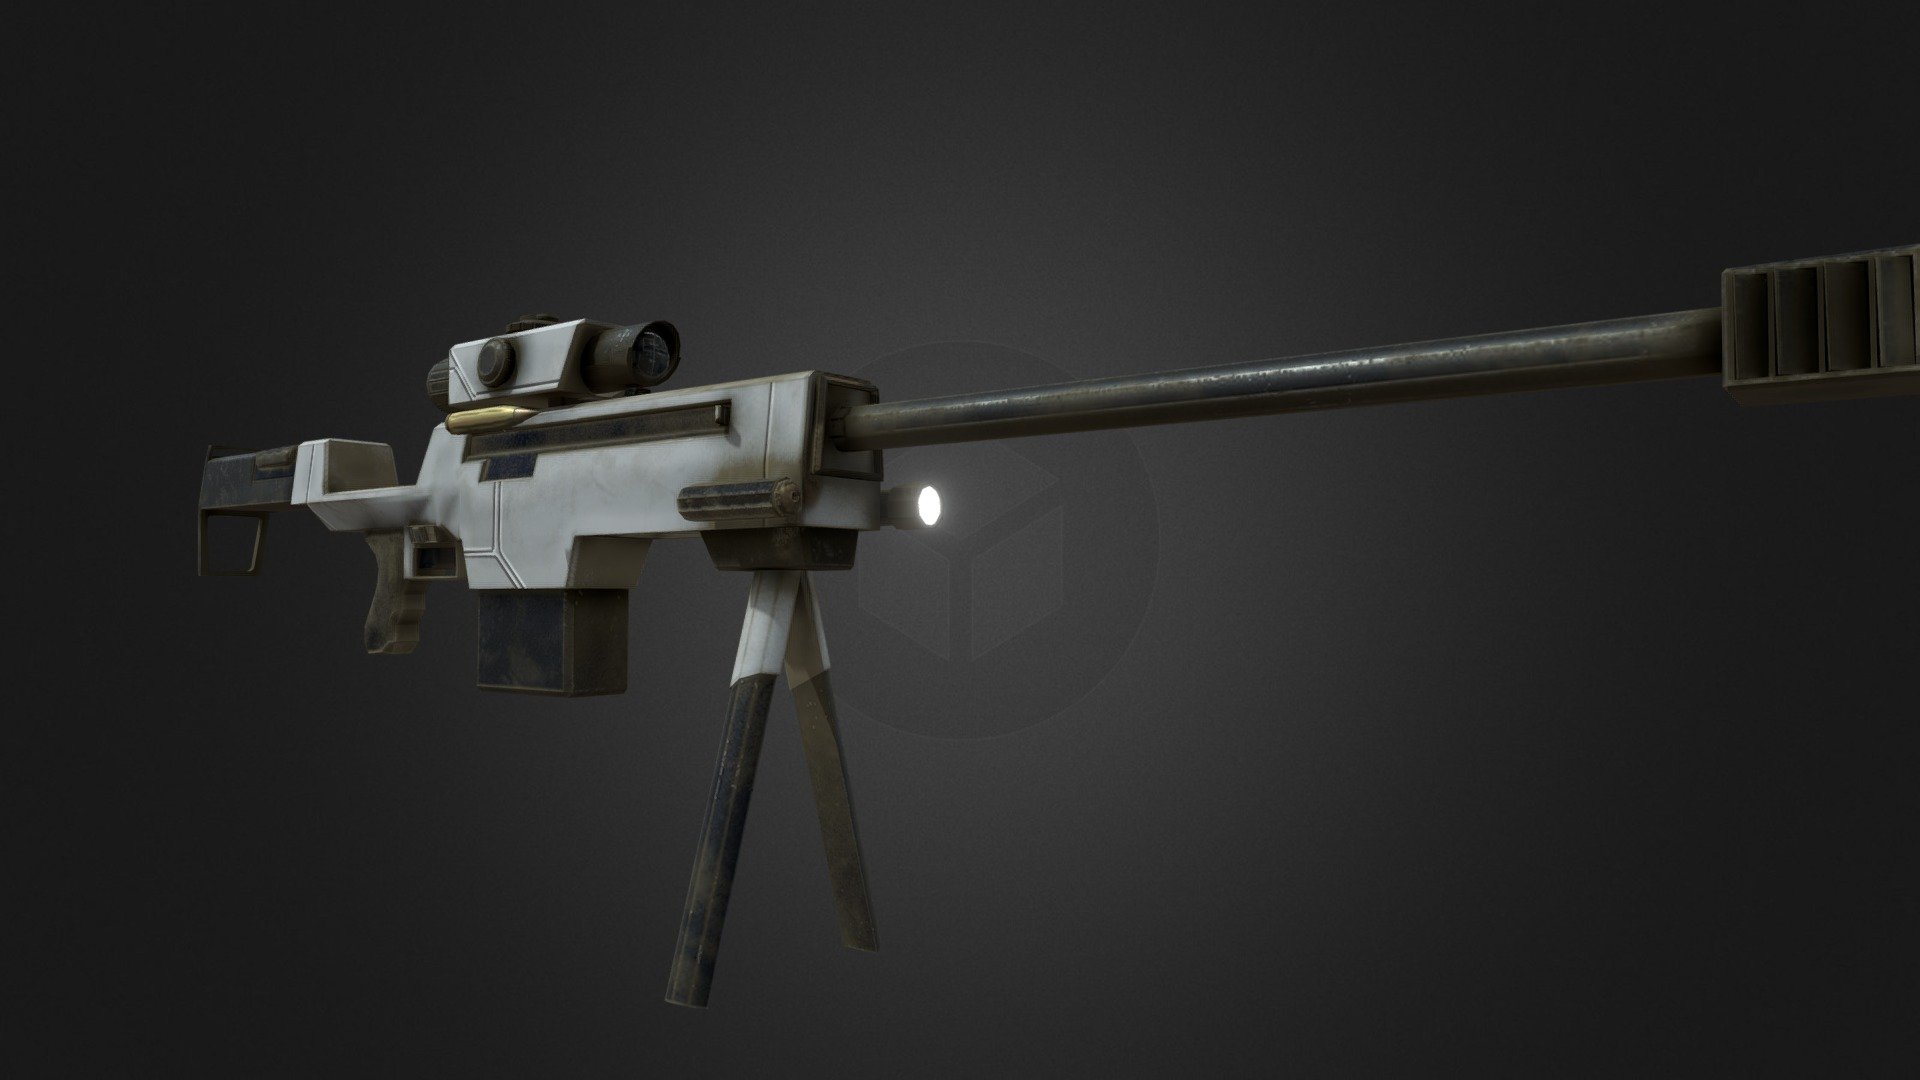 This is a low-poly model that converts from a machine gun to a sniper 3d model